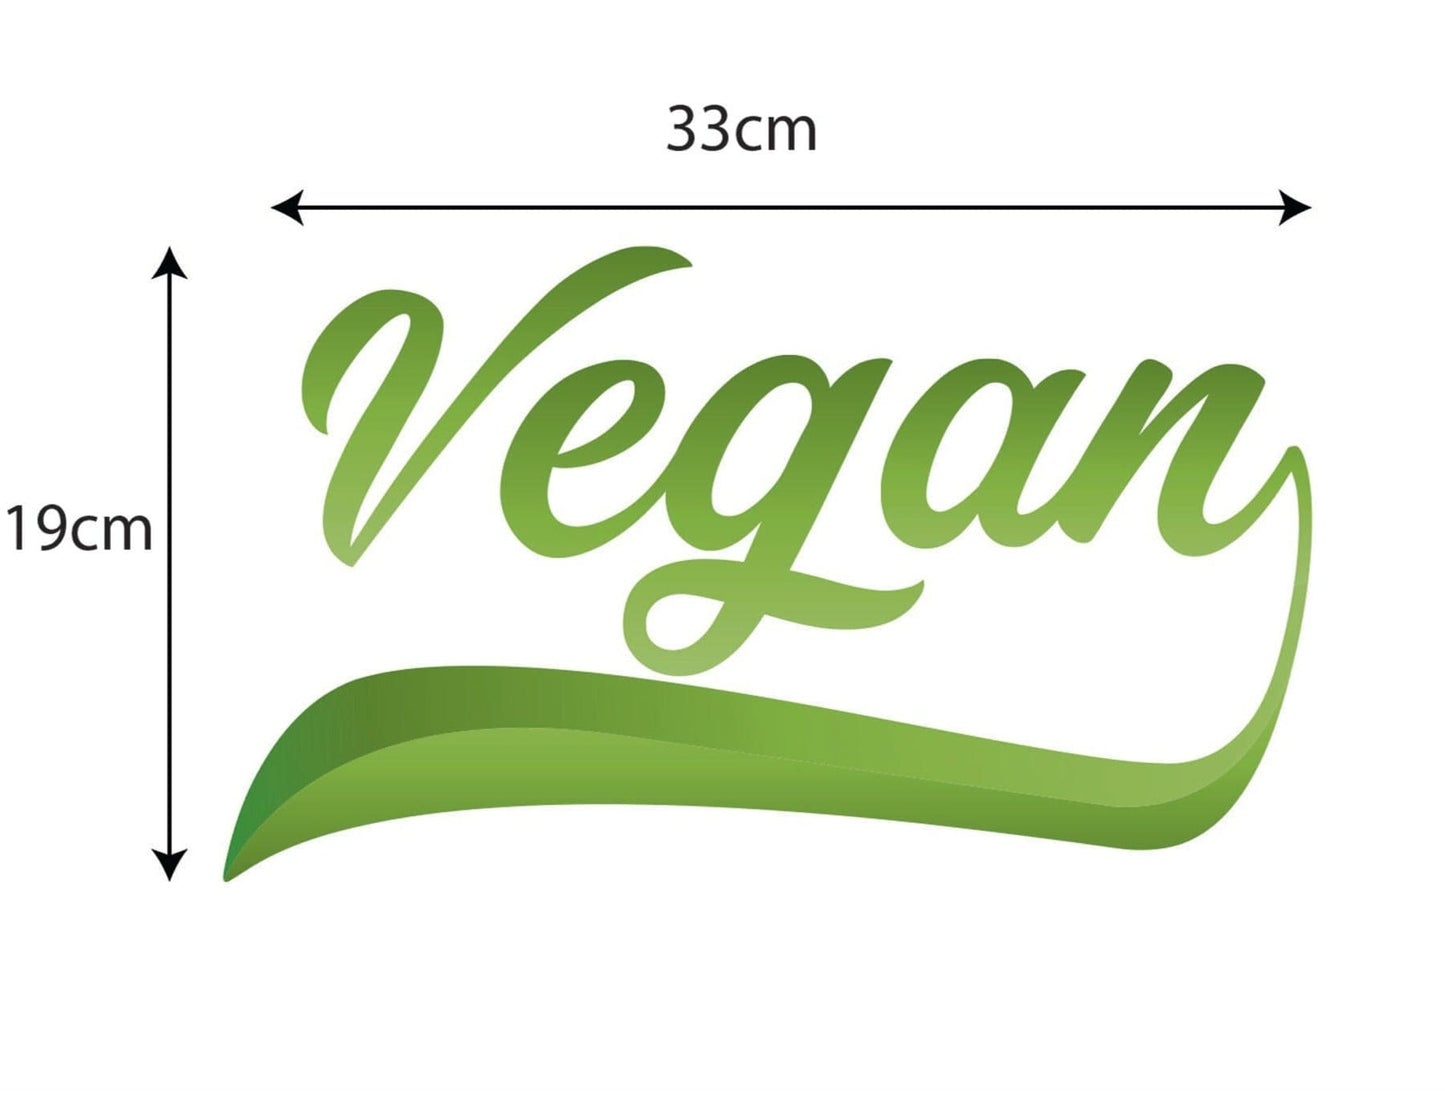 Vegan Decal No Background 190 x 110mm or 330 x 190mm